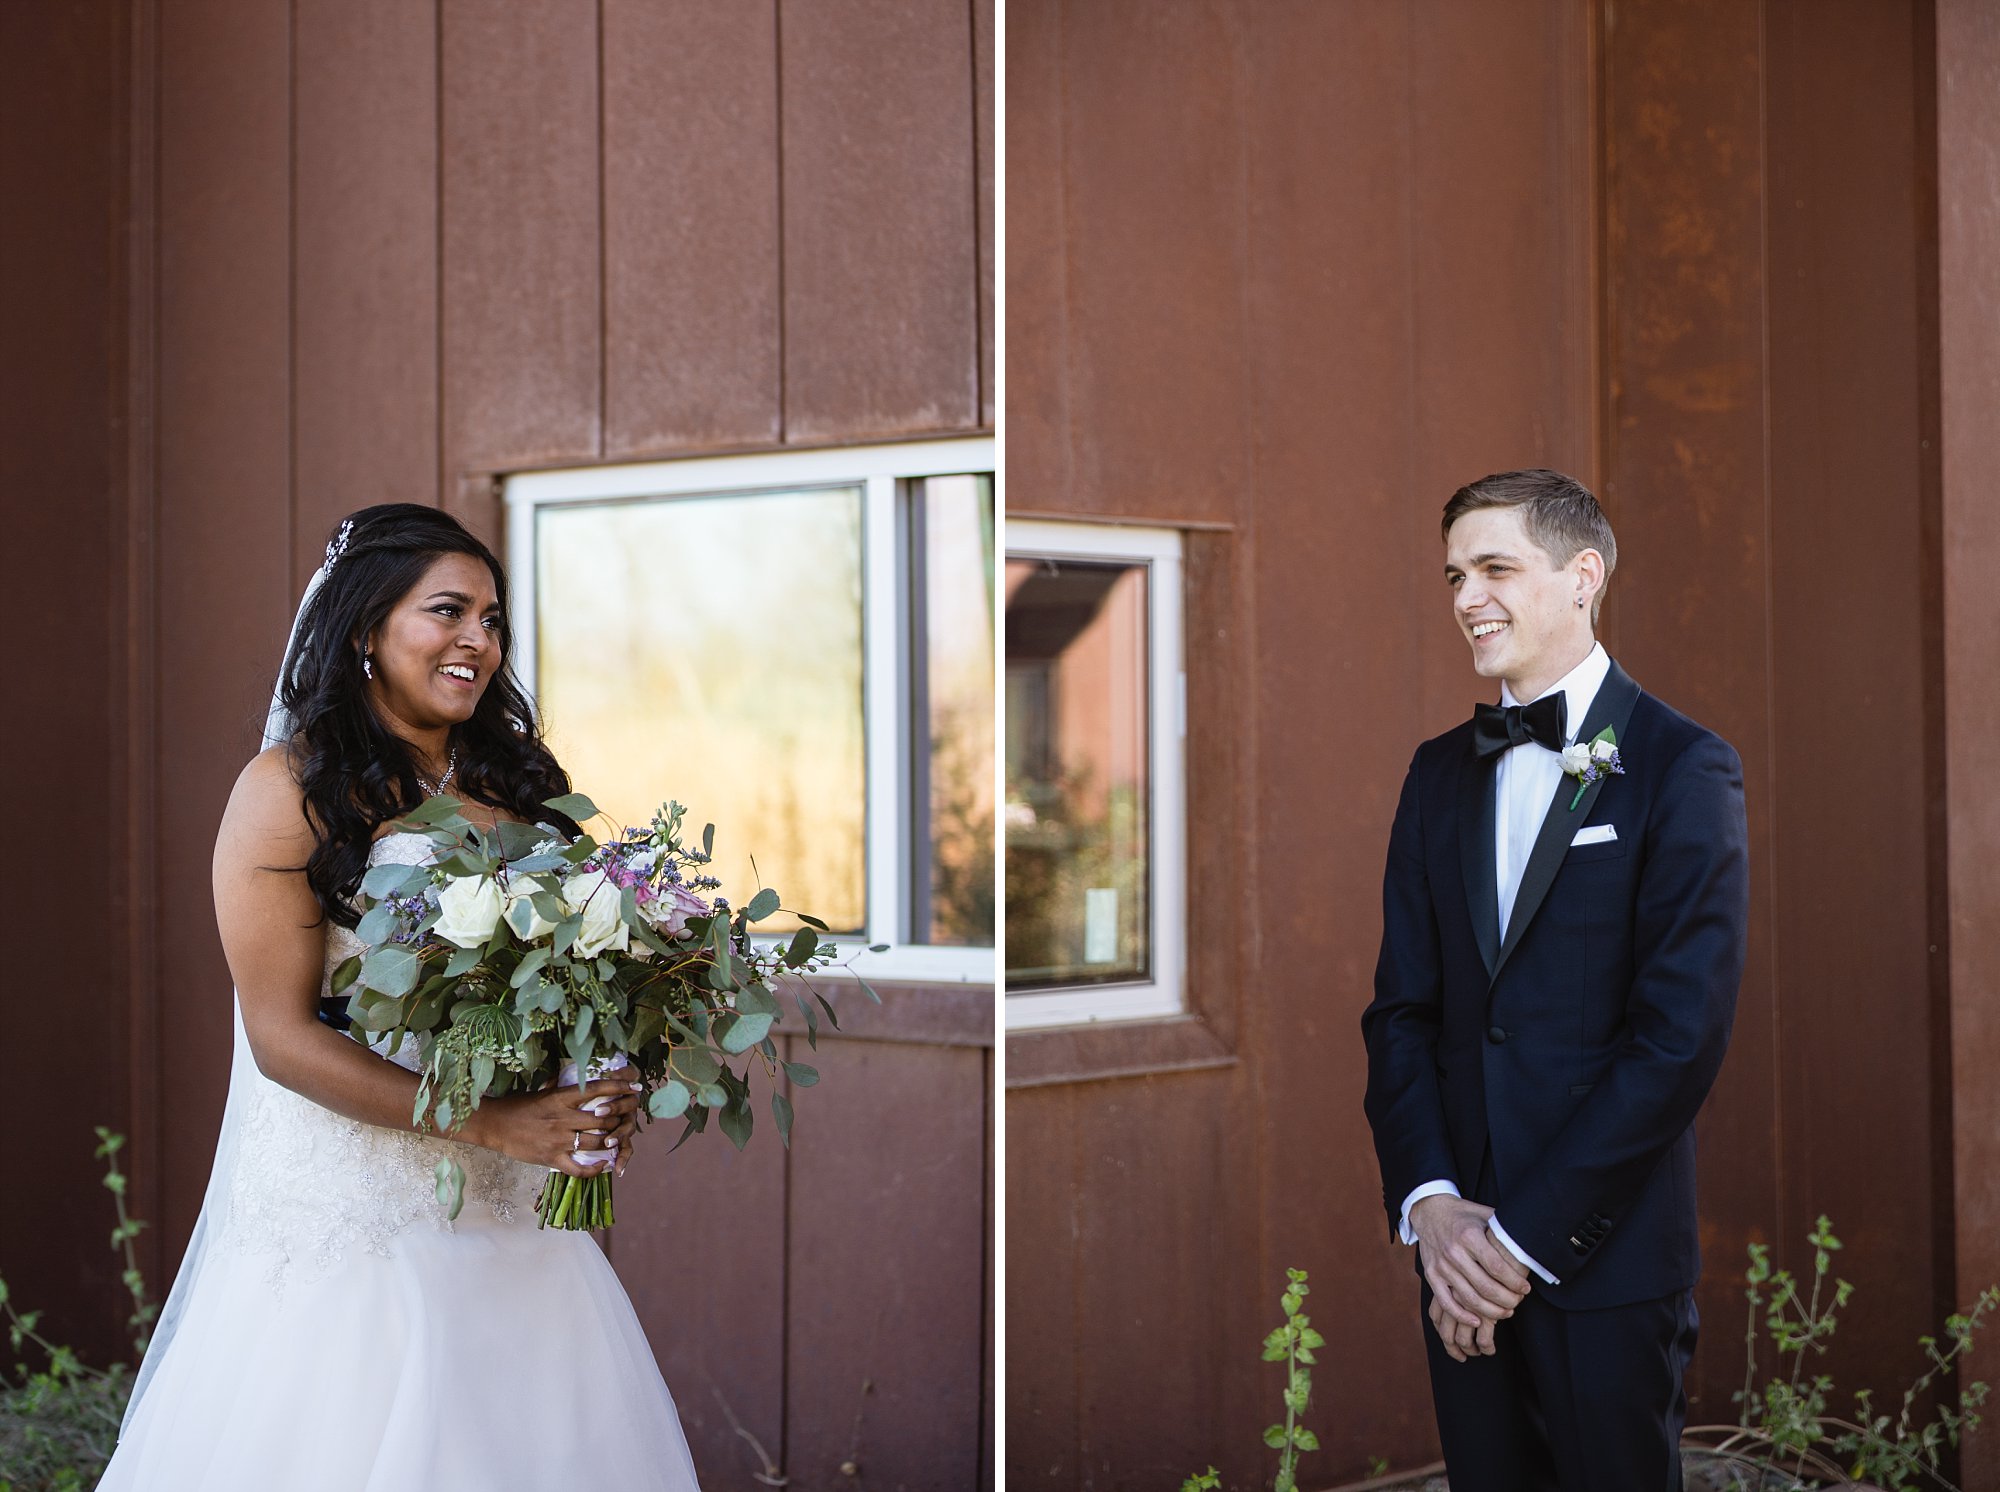 Bride and groom during their first look at the Rio Salado Audubon wedding venue in Phoenix Arizona by wedding photographer PMA Photography.